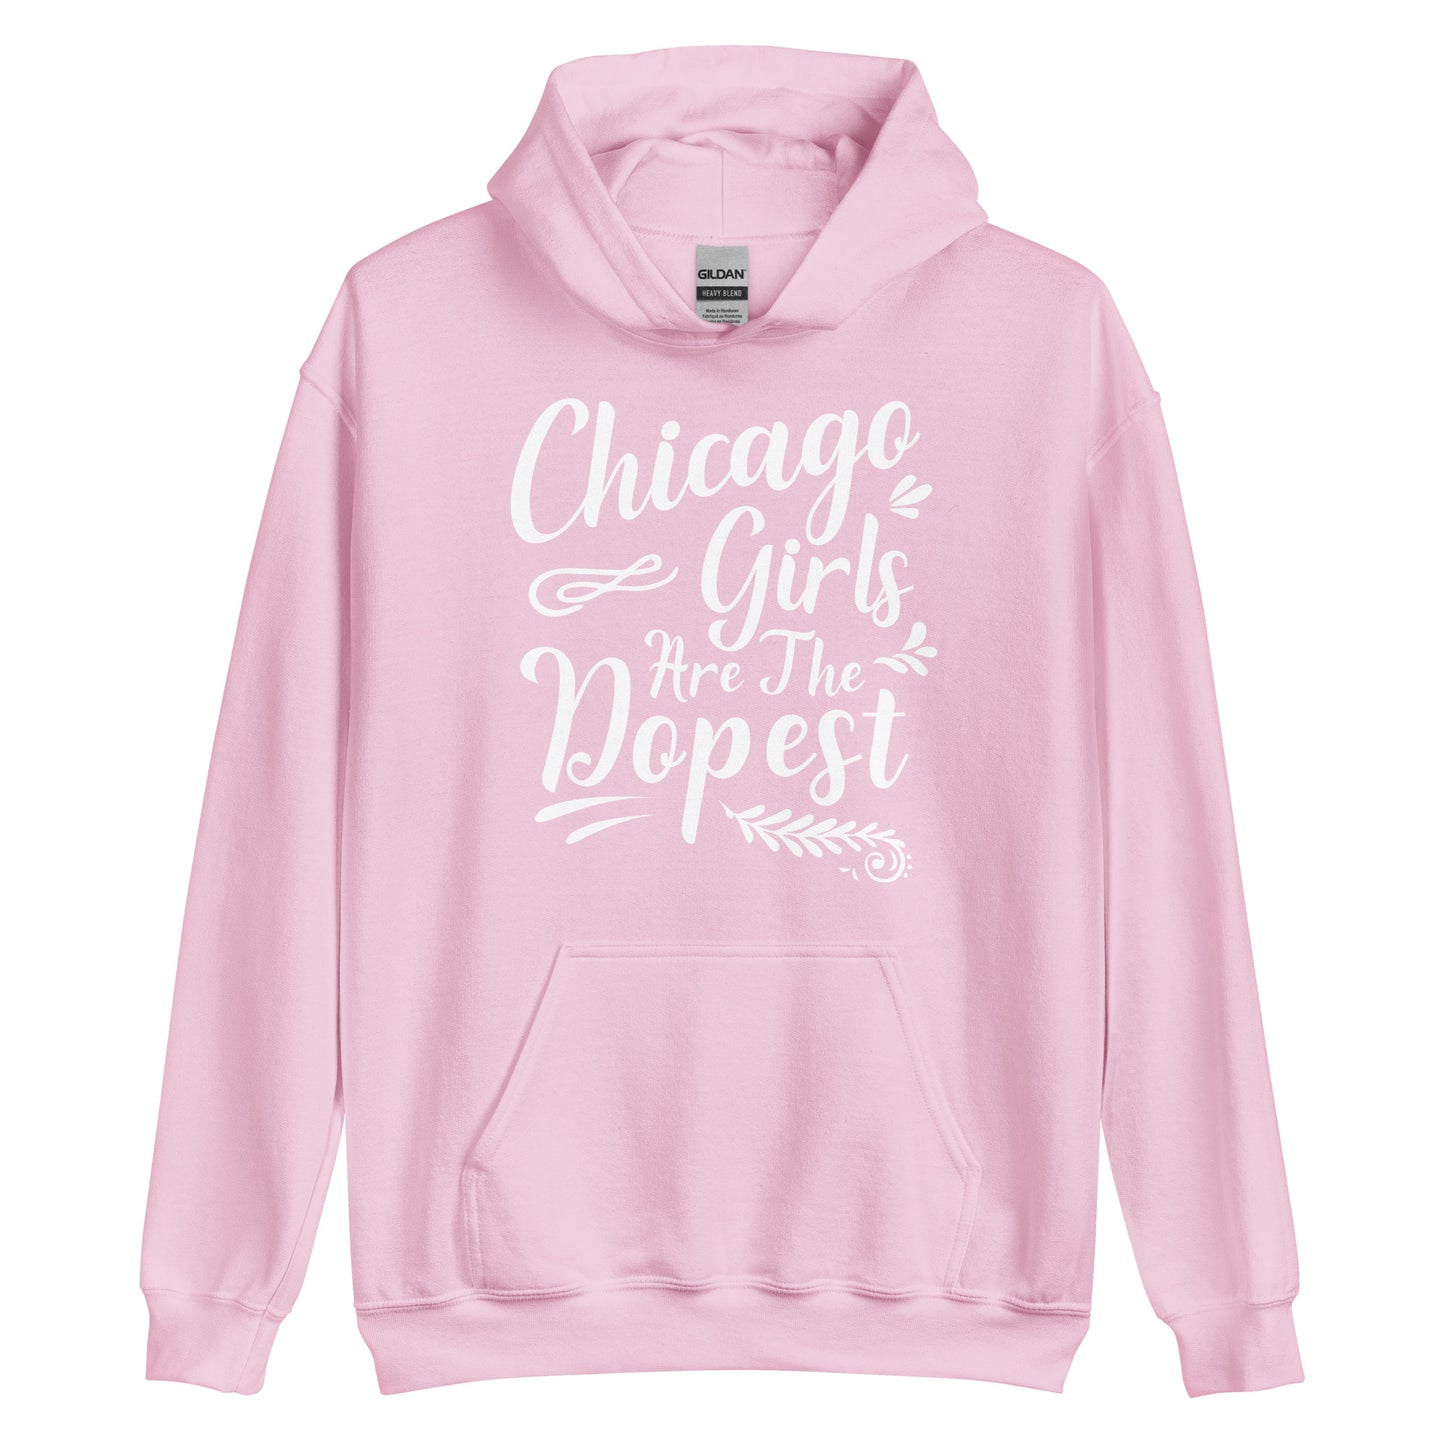 Chicago Girls Are The Dopest Hoodie